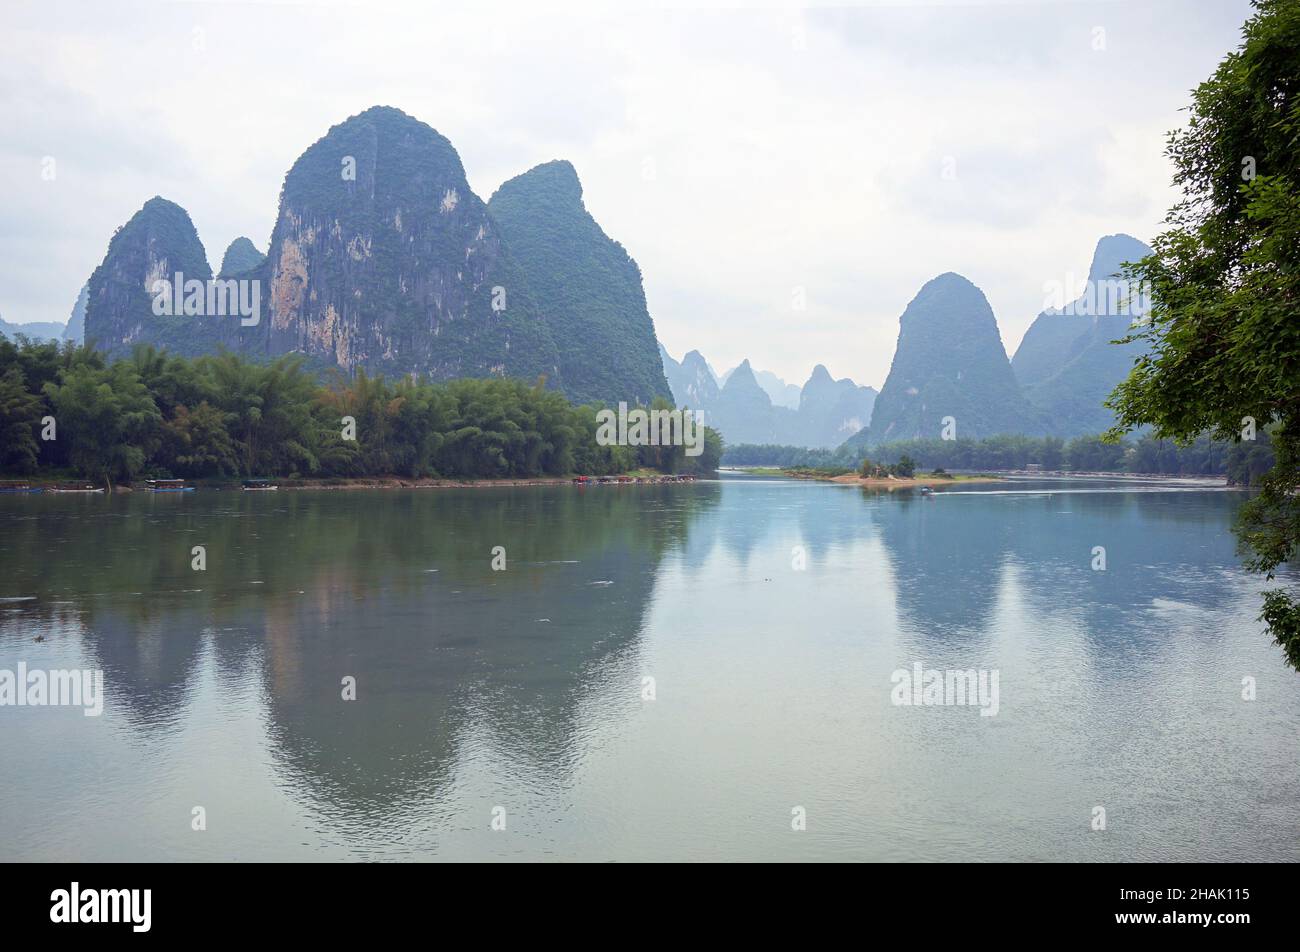 Mountains and river in Guilin, China Stock Photo